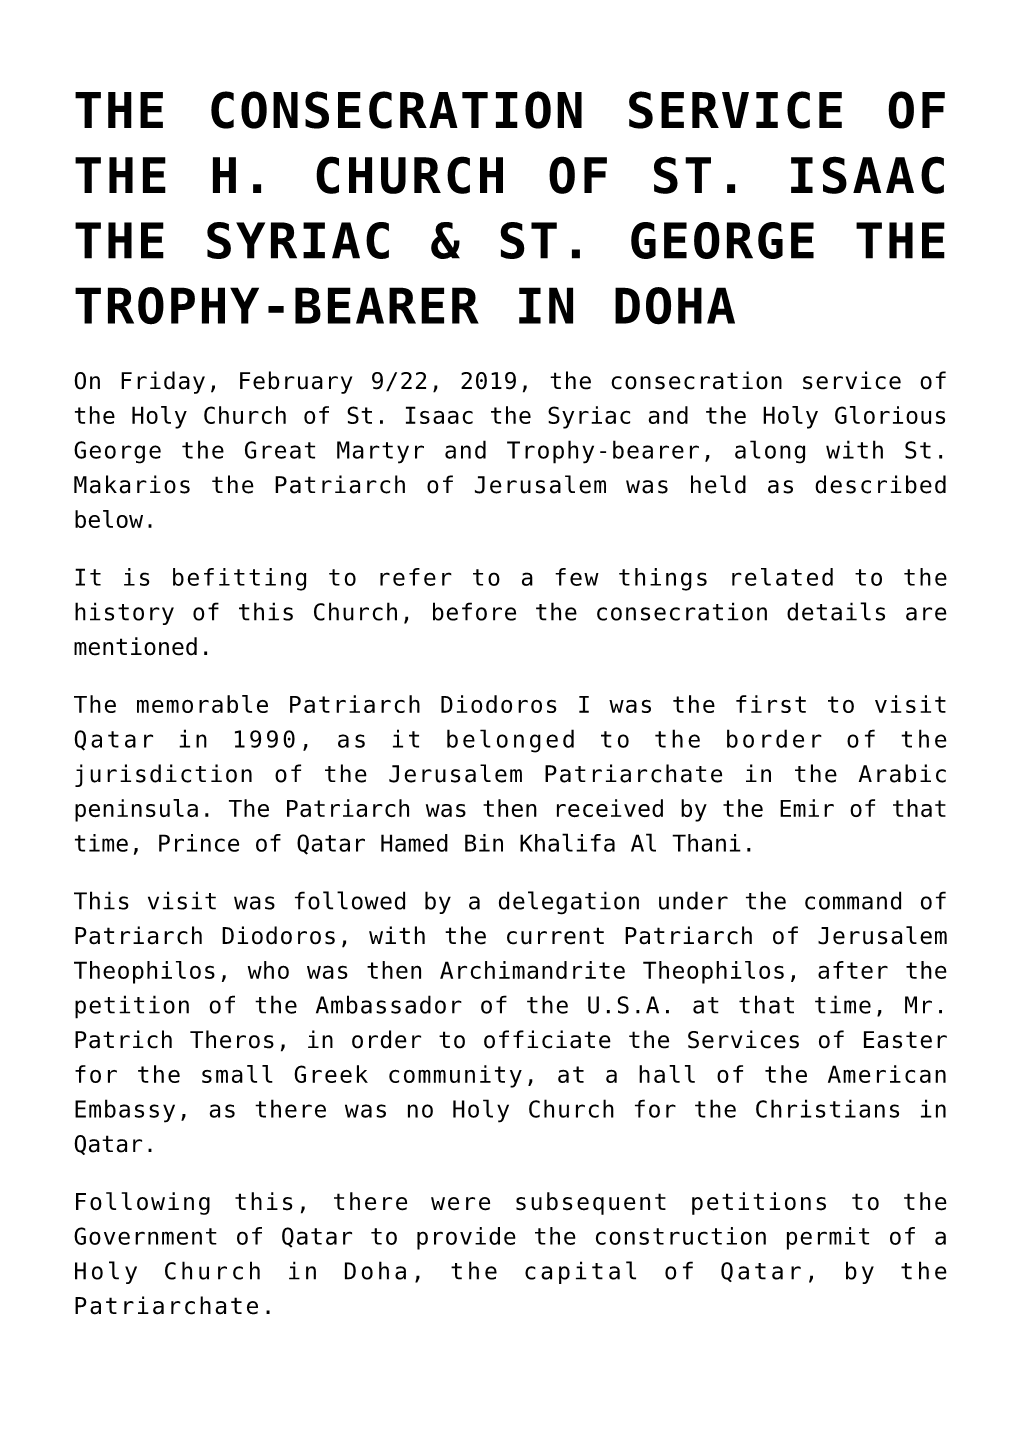 The Consecration Service of the H. Church of St. Isaac the Syriac & St